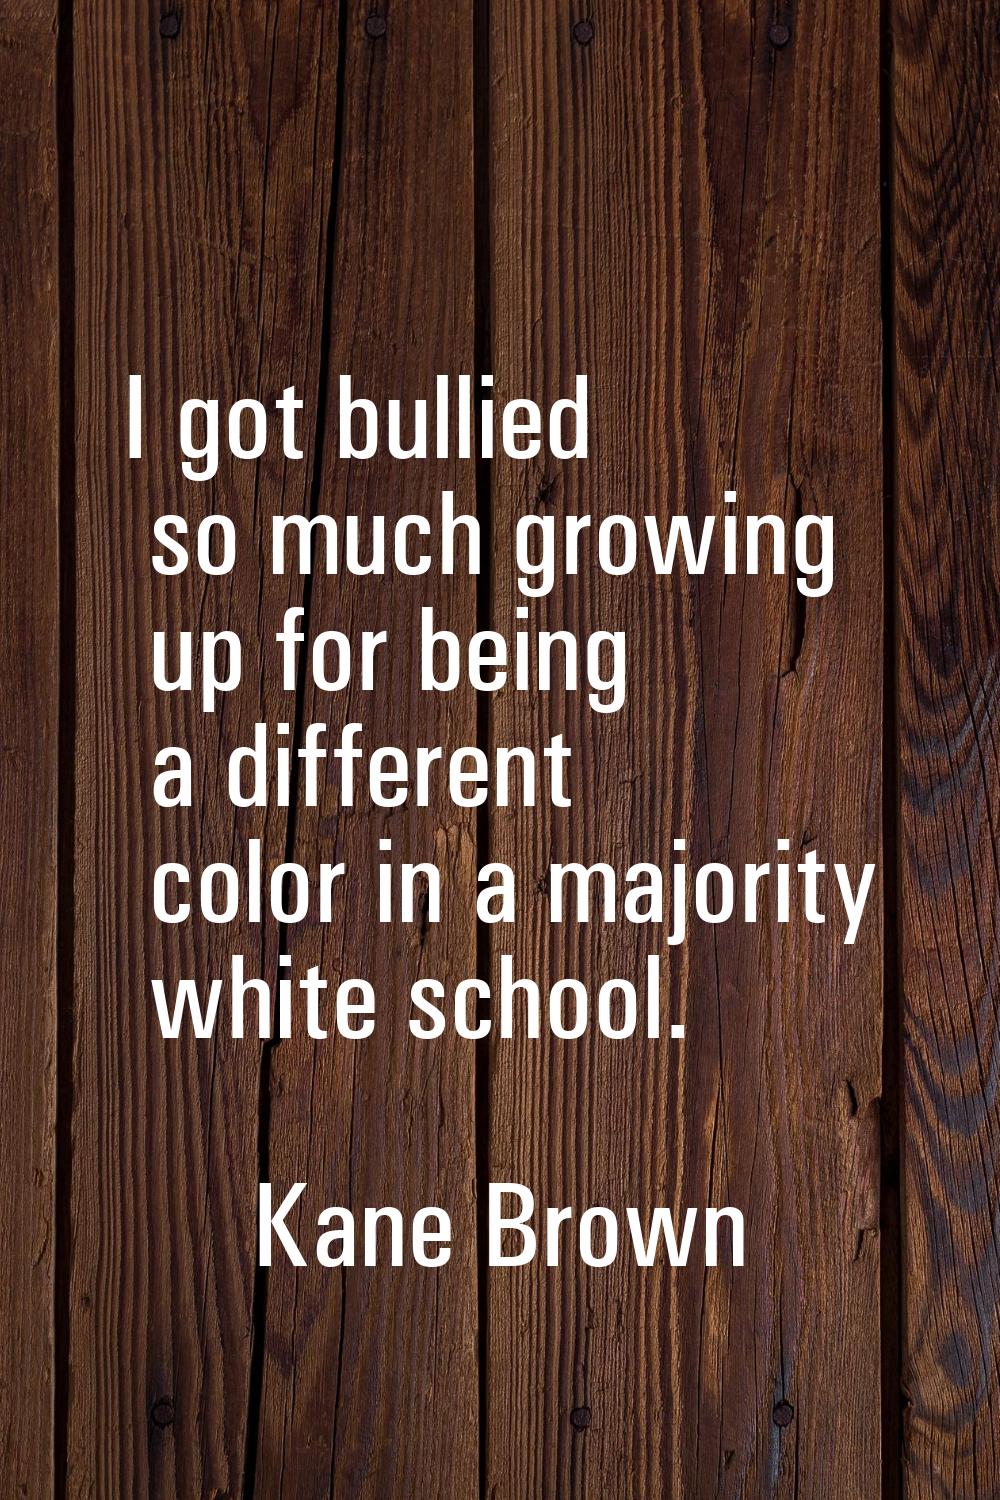 I got bullied so much growing up for being a different color in a majority white school.